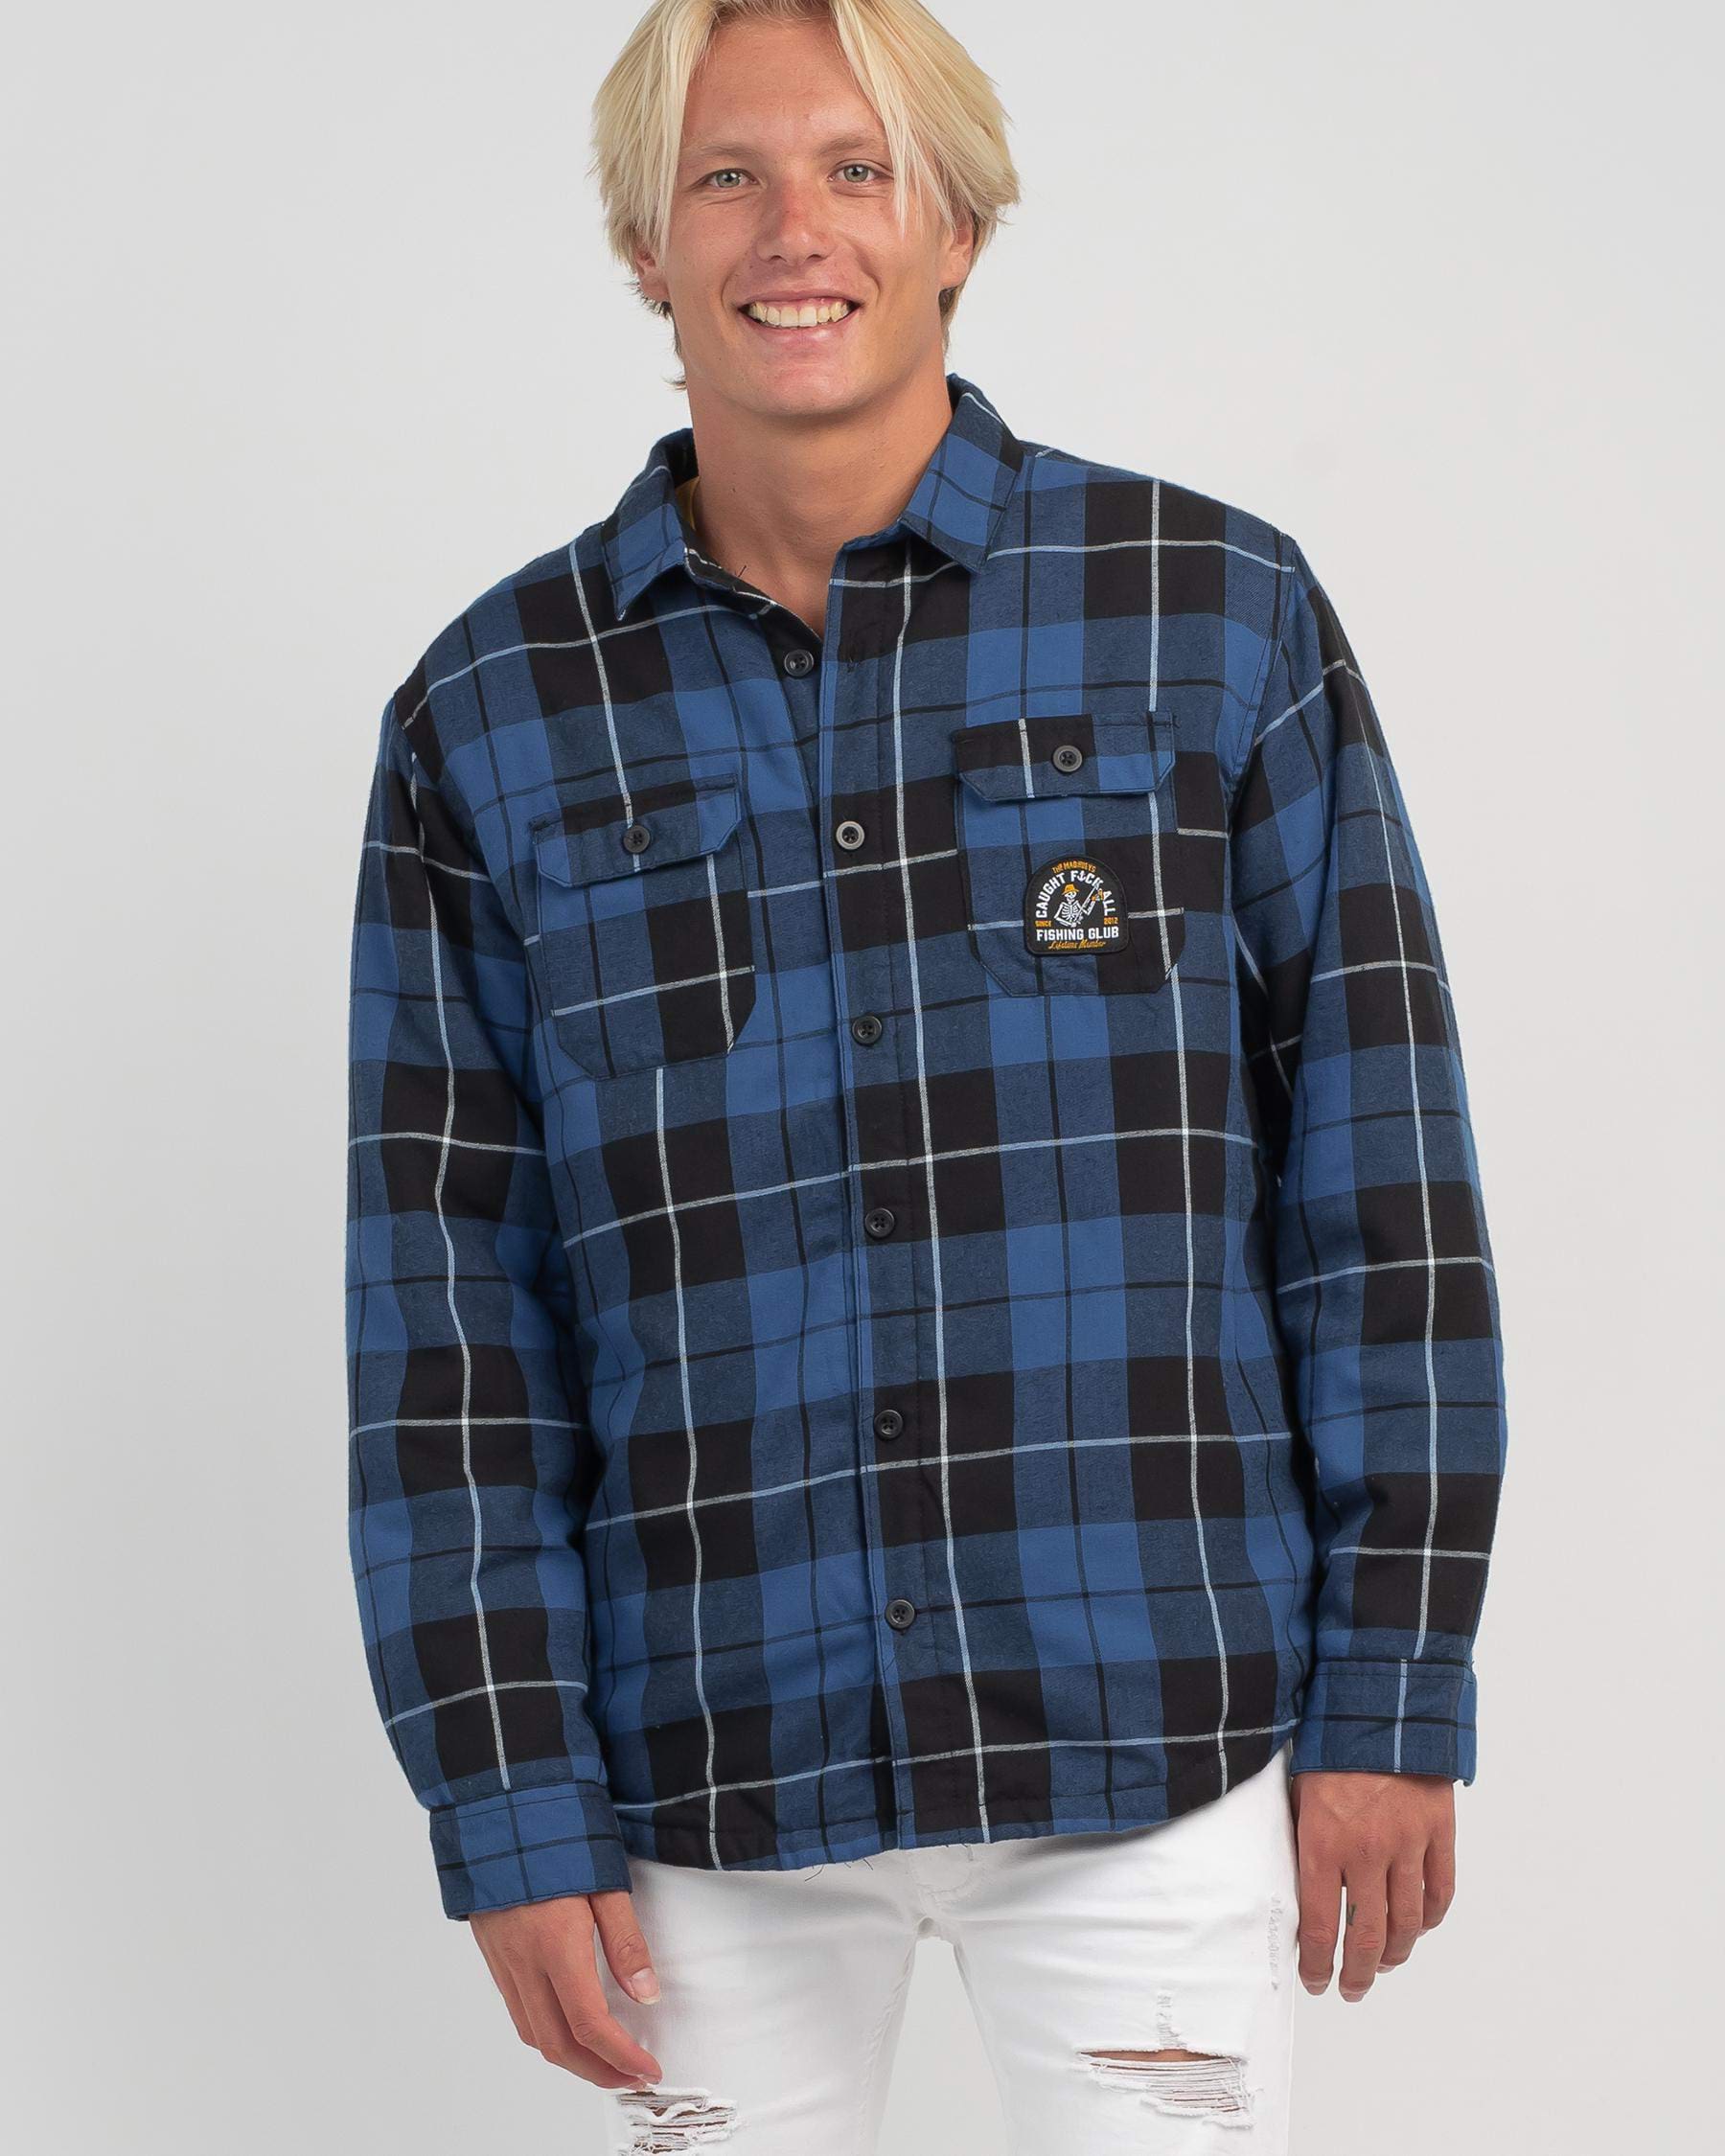 The Mad Hueys Caught FK All Plaid Jacket In Navy - Fast Shipping & Easy ...